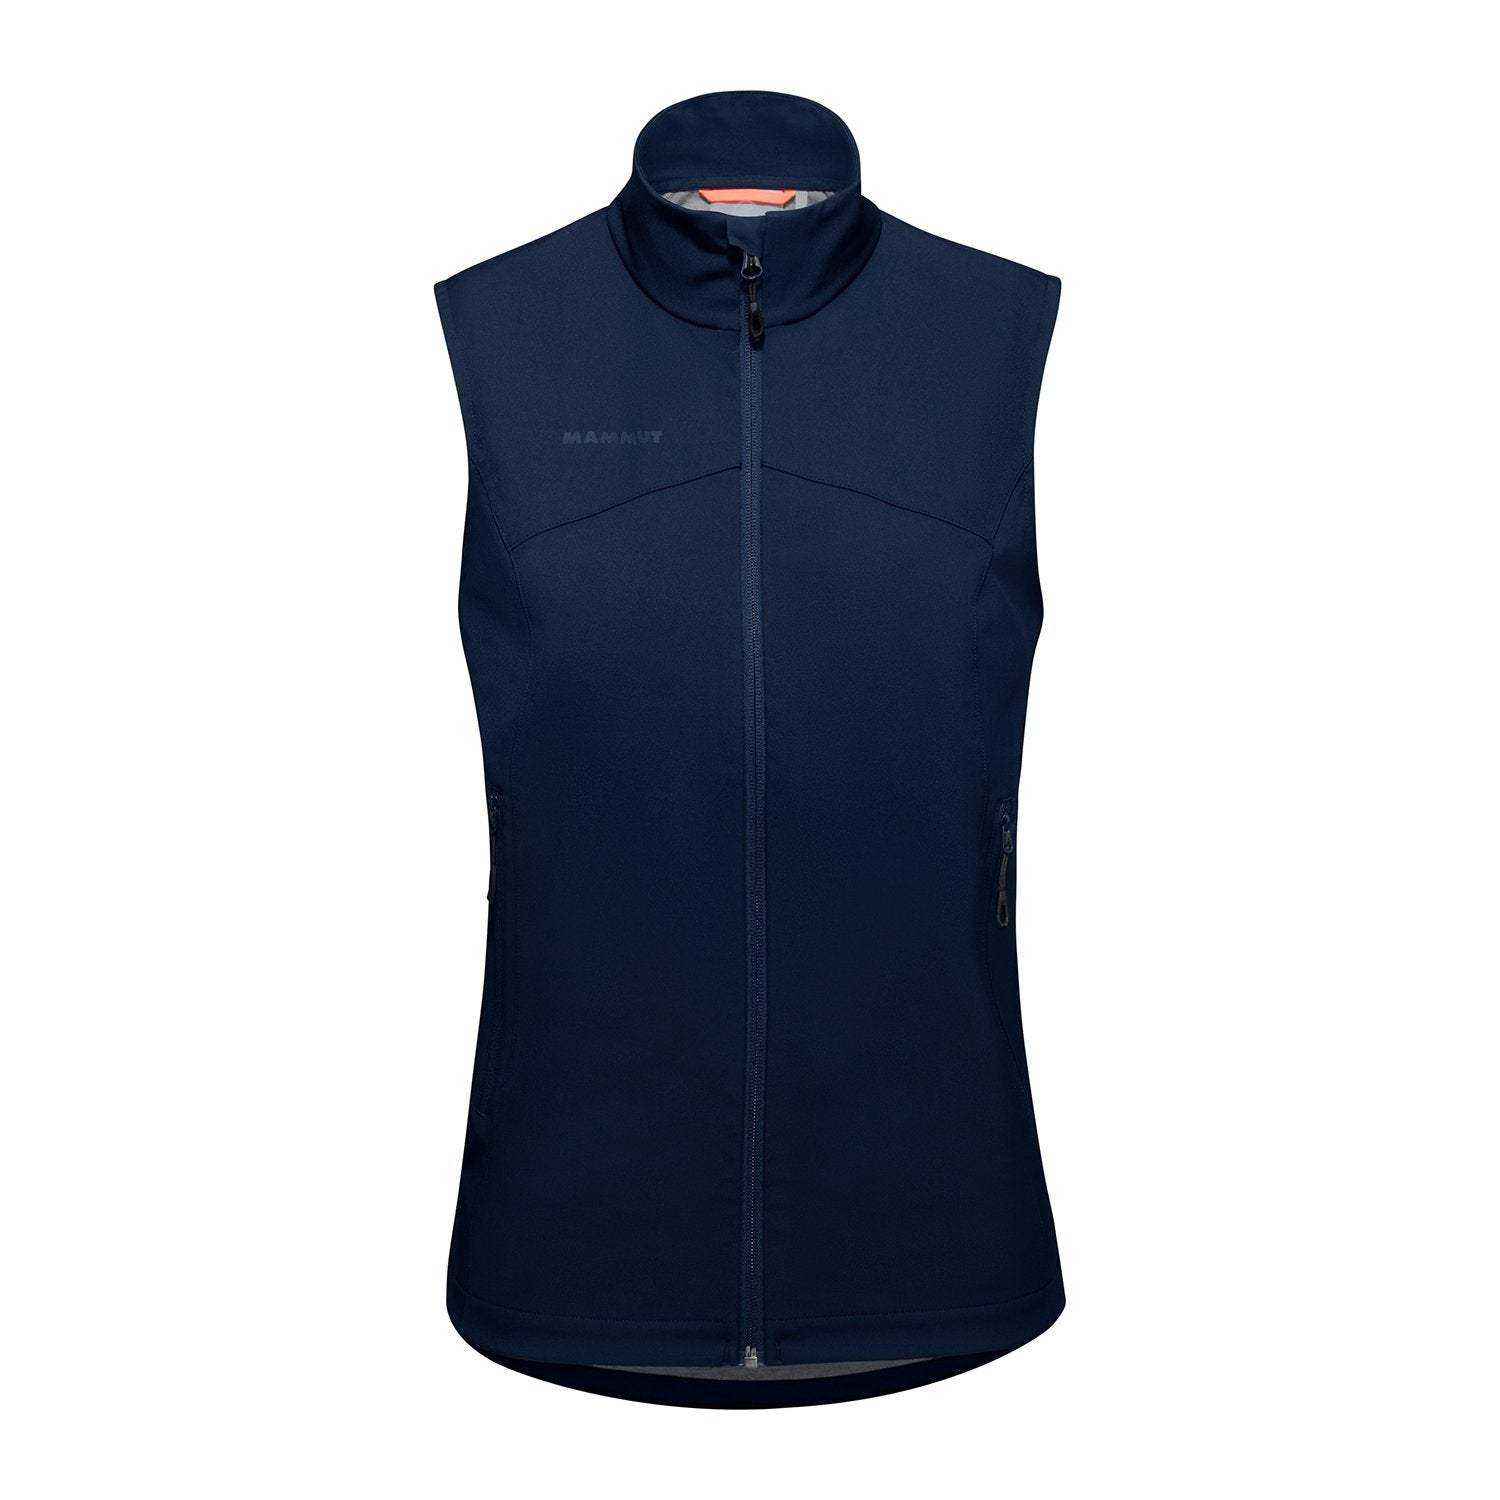 Women's Corporate Softshell Vest by Mammut - The Luxury Promotional Gifts Company Limited